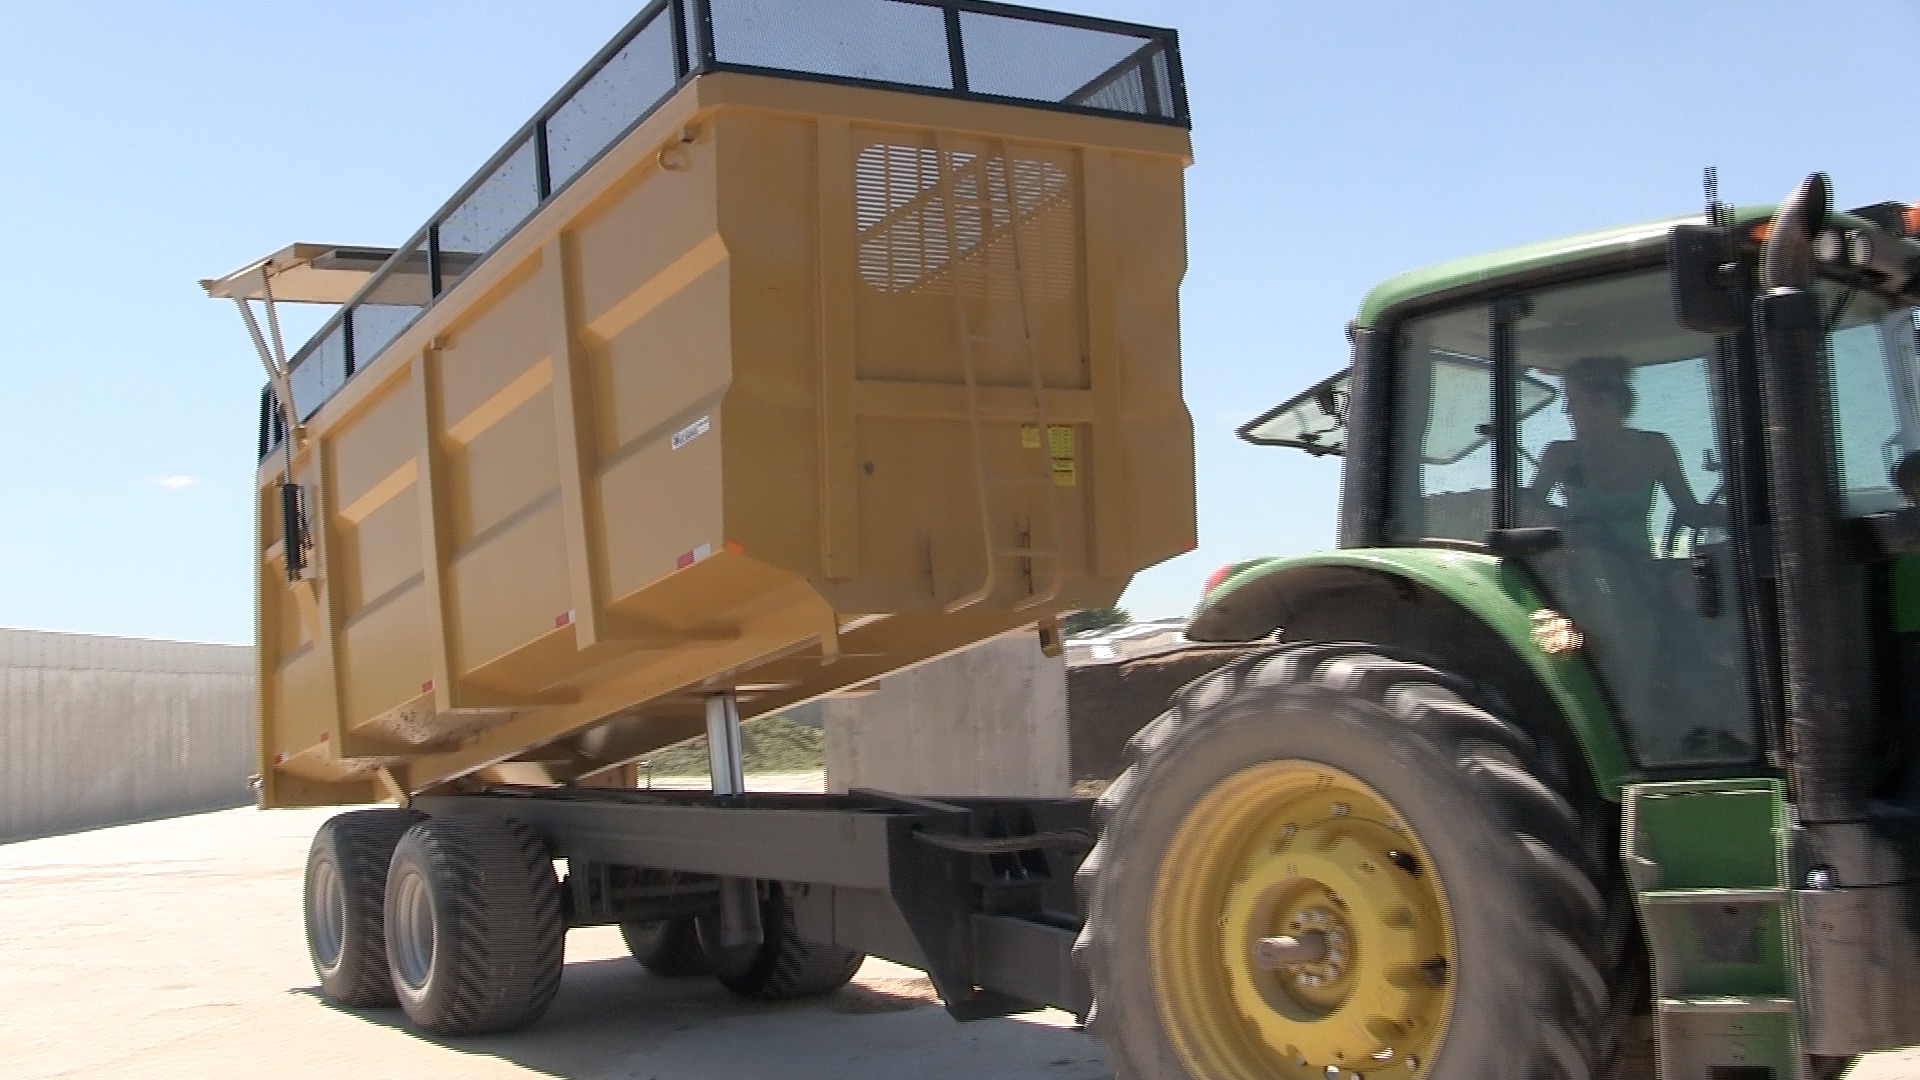 An image of the 20 ton silage dumpster trailer